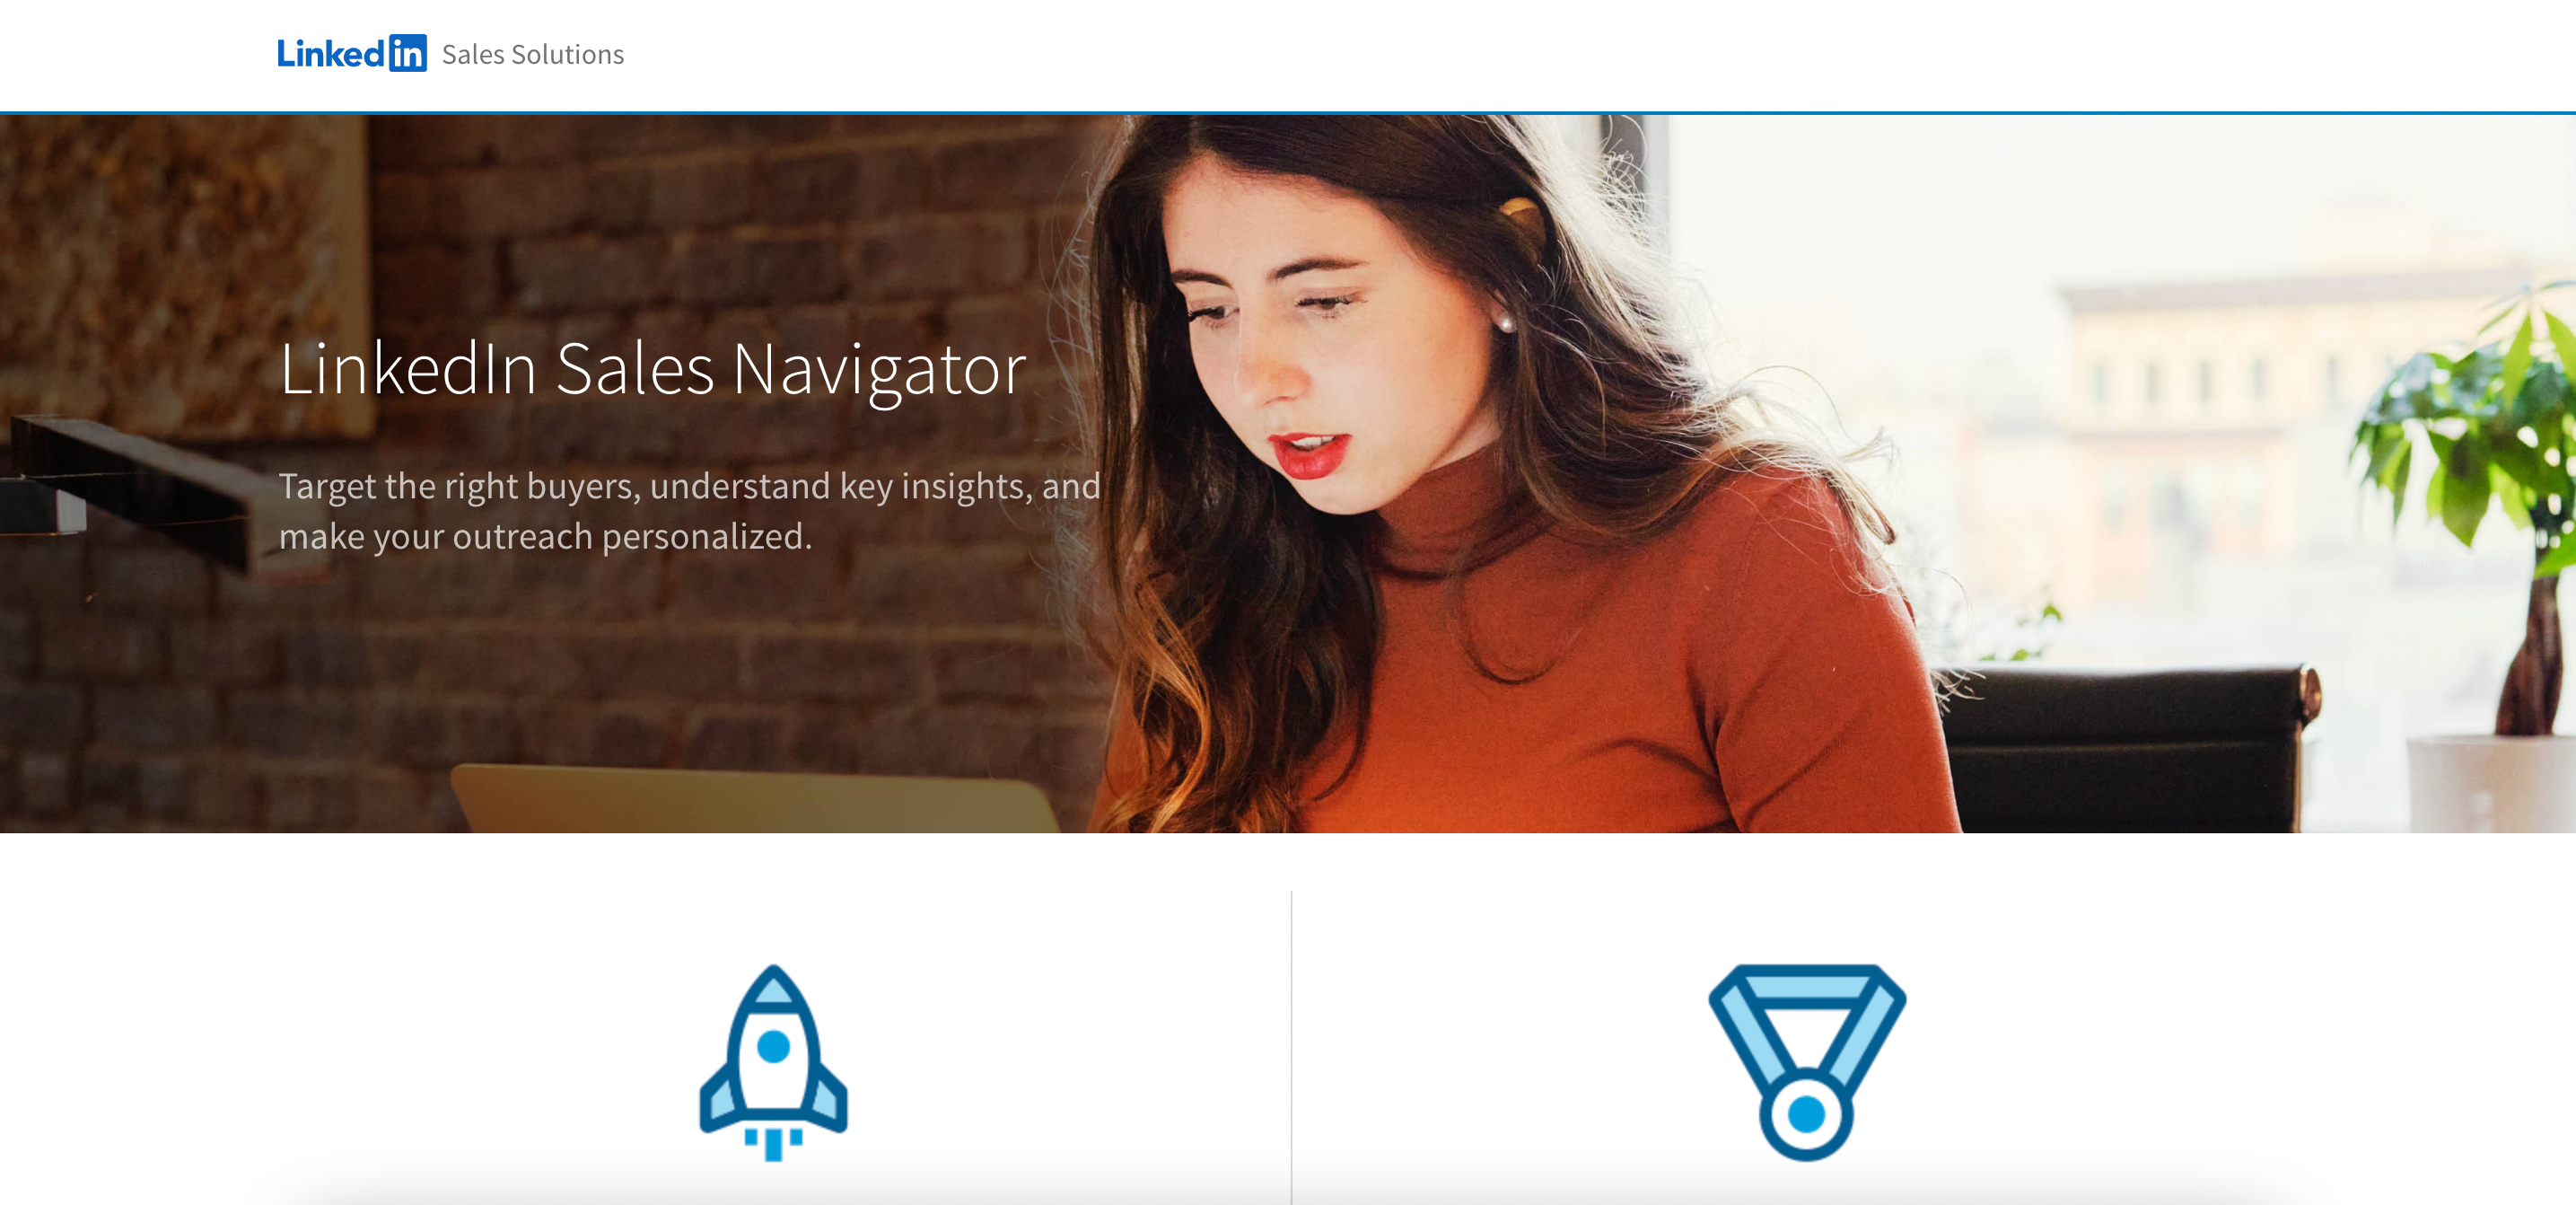 LinkedIn Sales Navigator is a LinkedIn tool that will help ypu to target the right buyers.